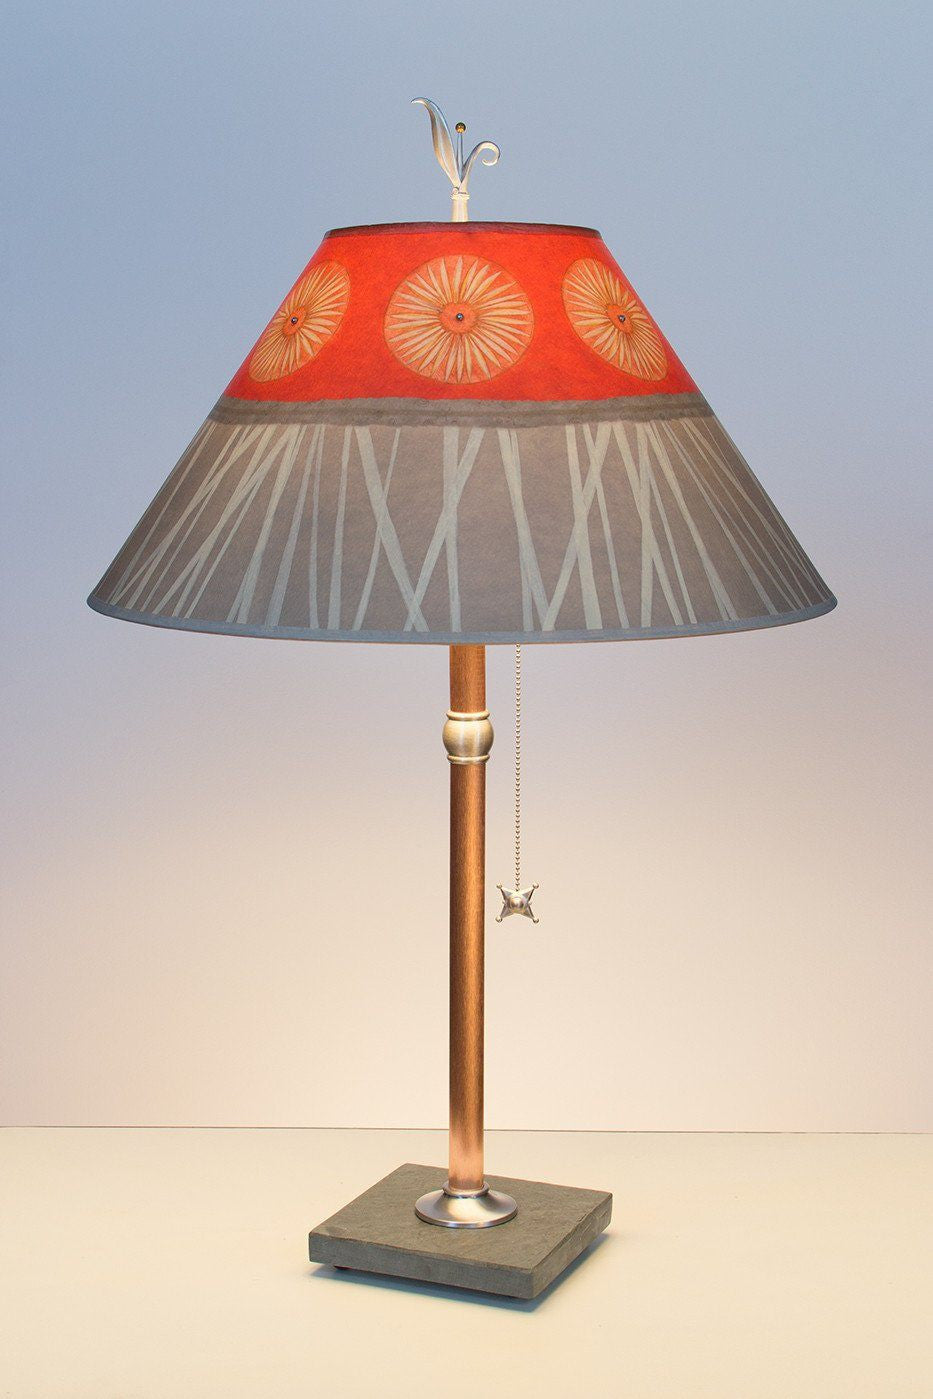 Janna Ugone &amp; Co Table Lamps Copper Table Lamp with Large Conical Shade in Tang